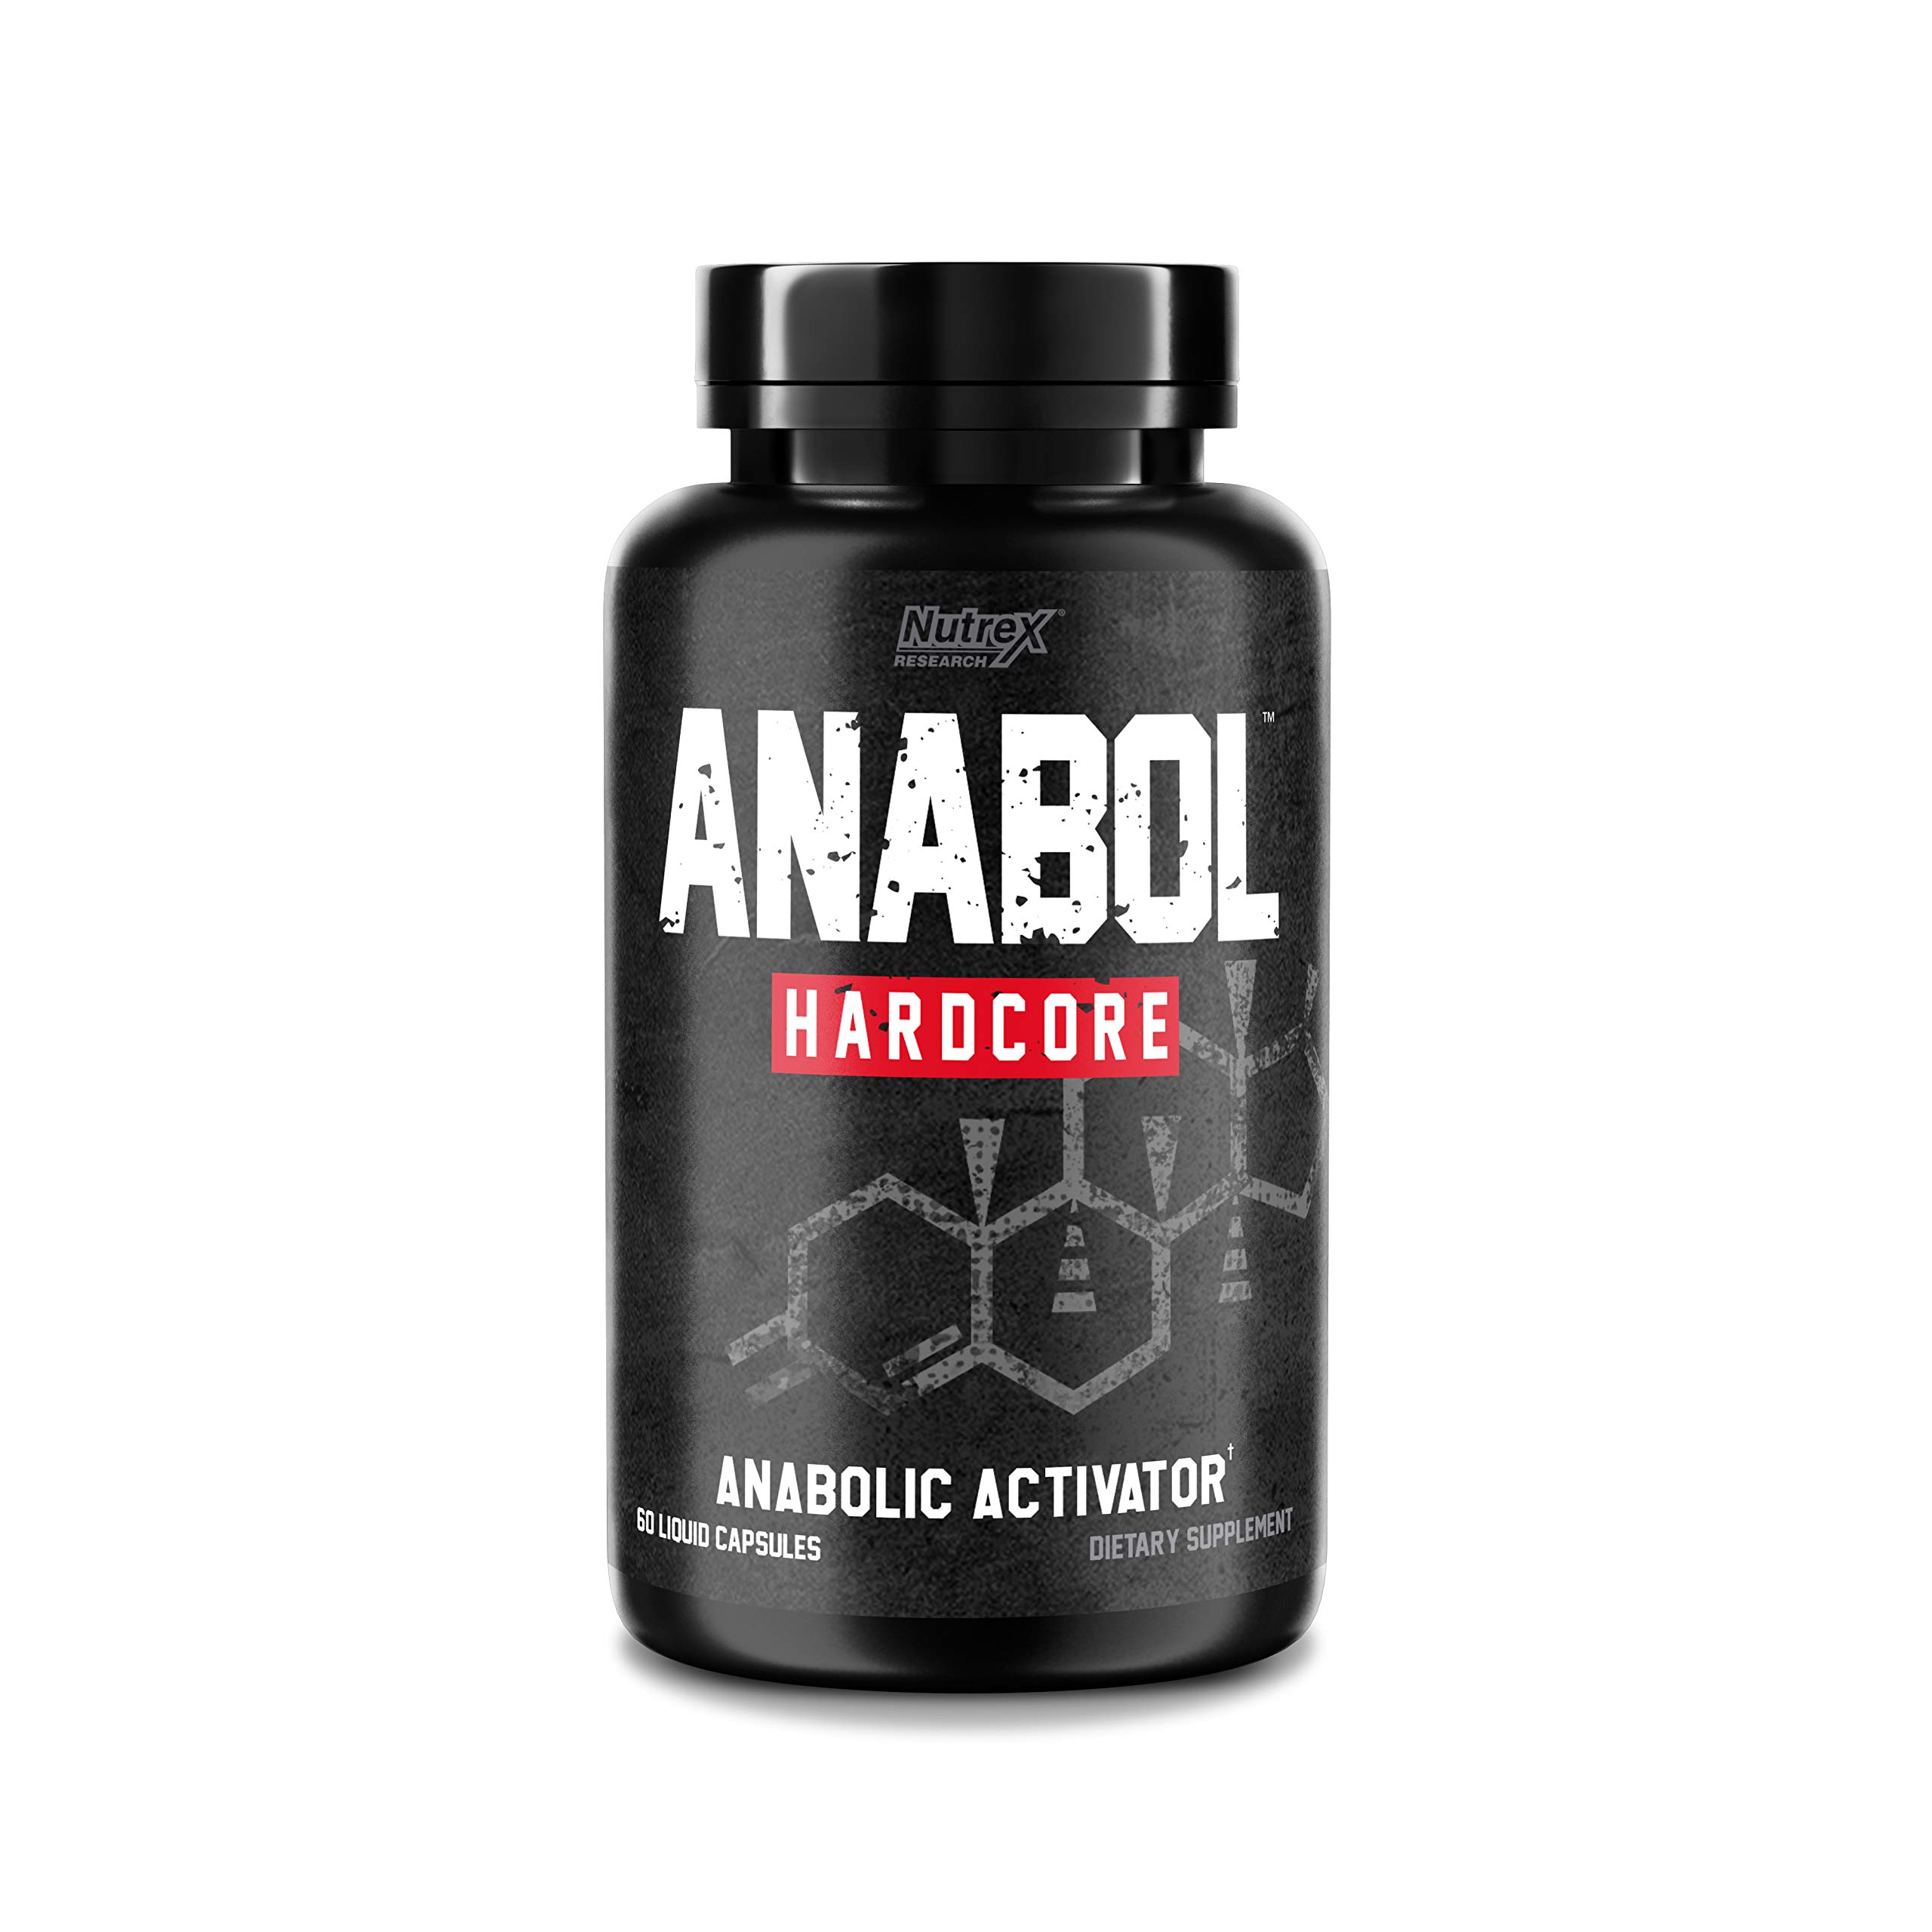 Is Anabolic Activator A Steroid